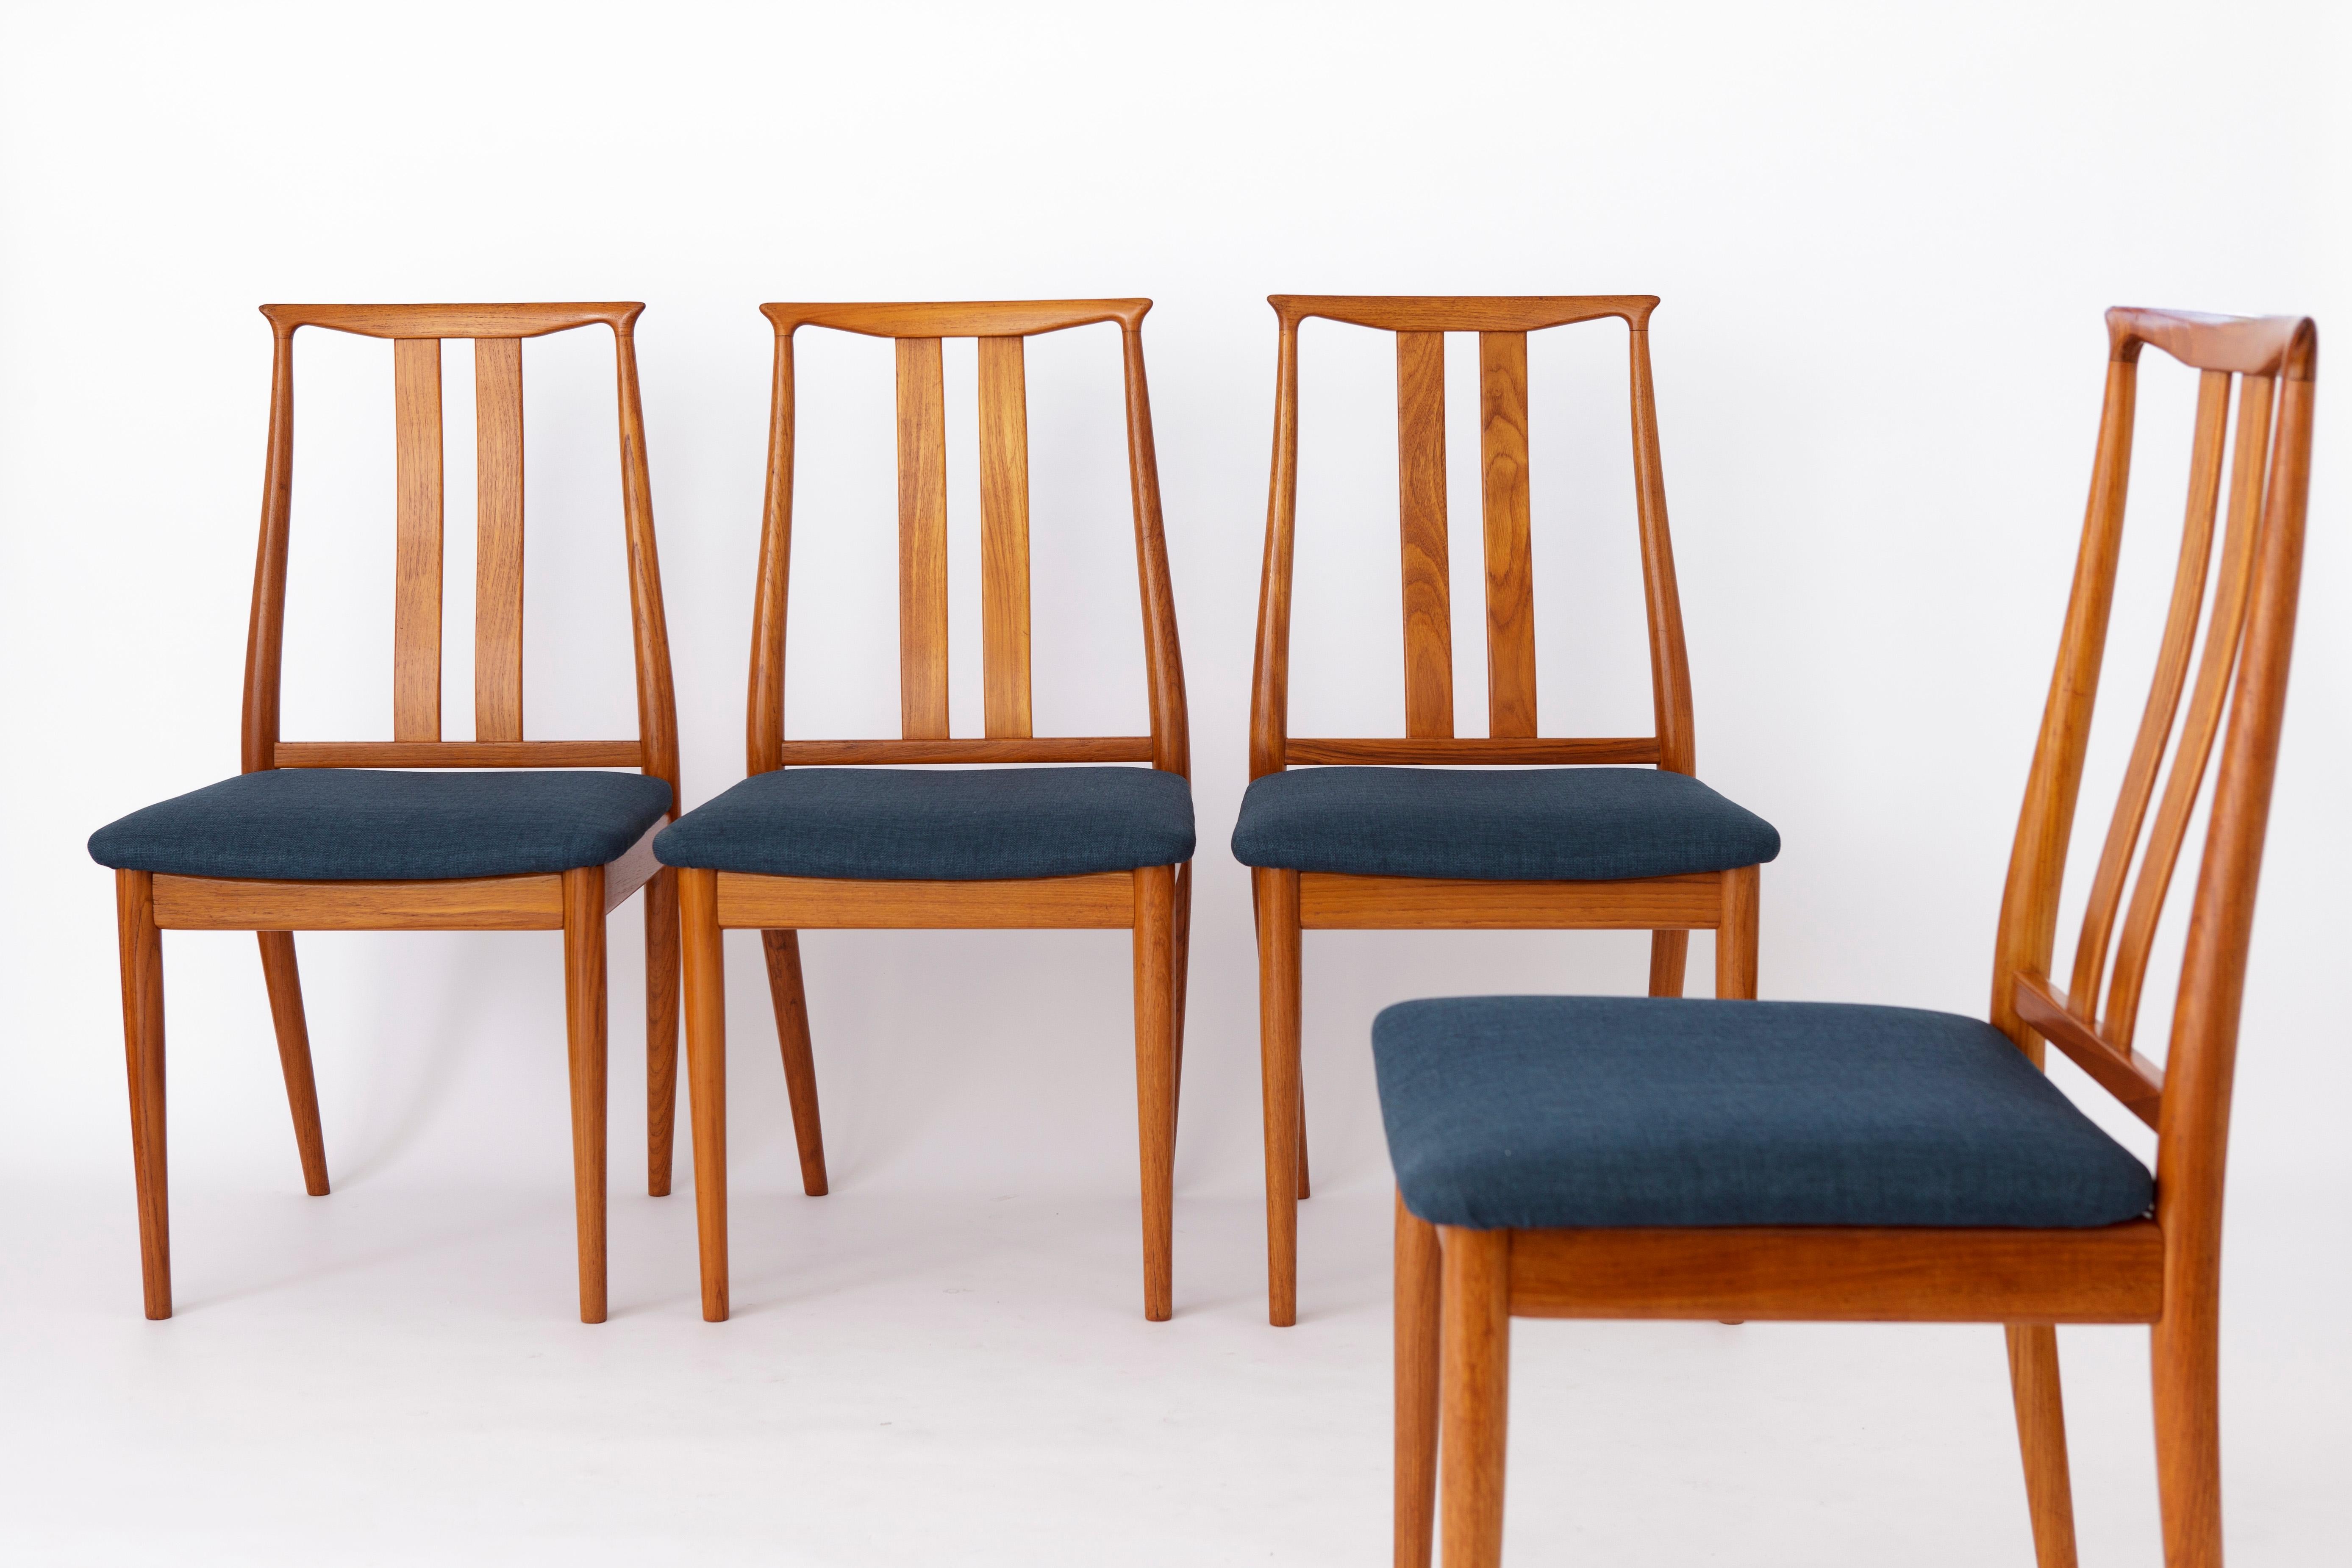 Set of 4 Danish vintage chairs from the 1960s. 
Manufacturer: Overseas Furniture A/S
Displayed price is for a set of 4. 

Sturdy teak wood chair frames. Refurbished and oiled. 
Reupholstered with dark blue textile cover. 
Manufacturer's mark under